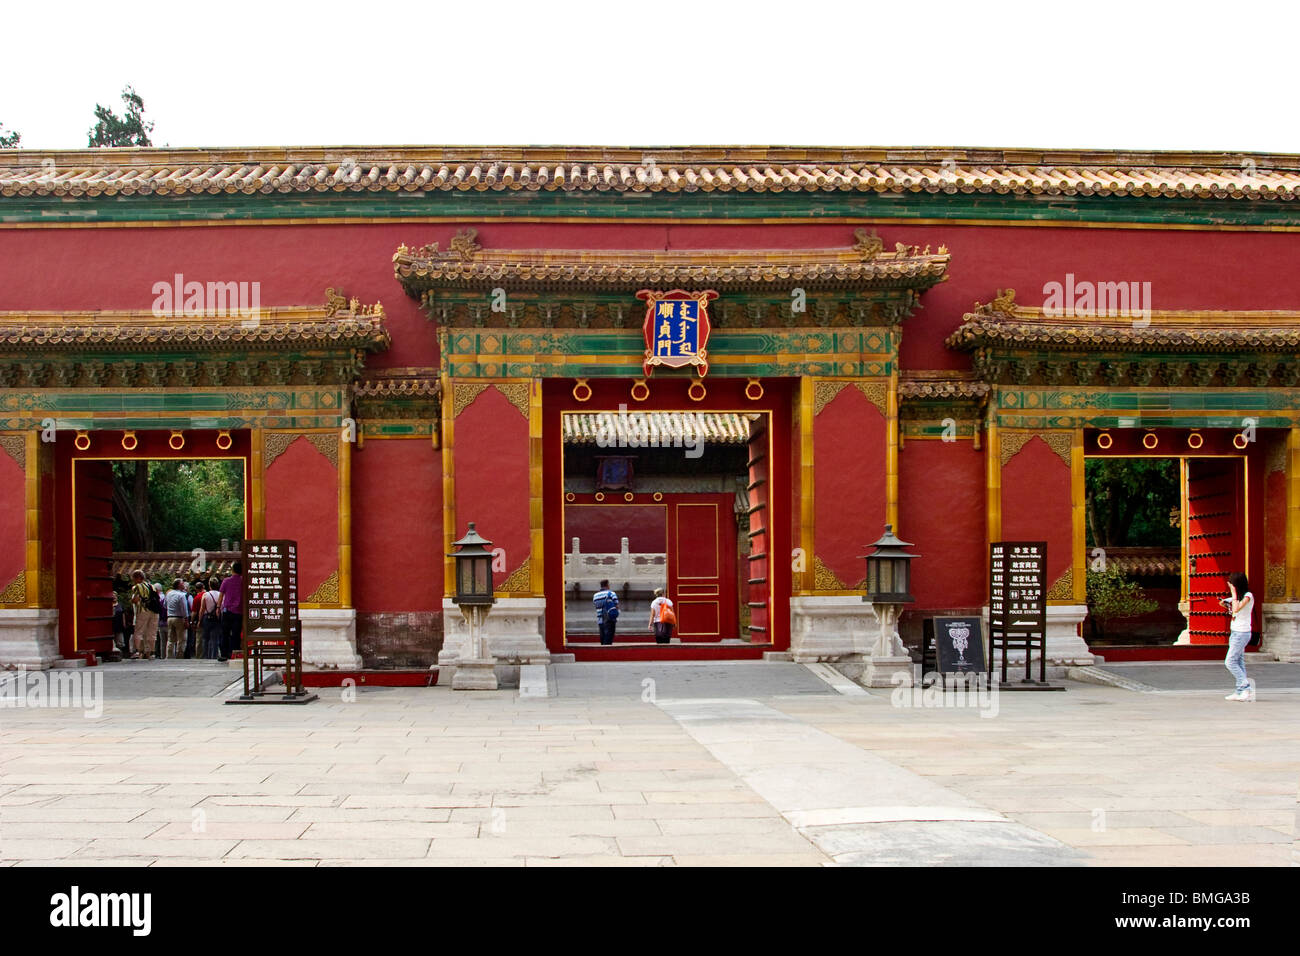 Gate Of Obedience And Chastity, Forbidden City, Beijing, China Stock Photo